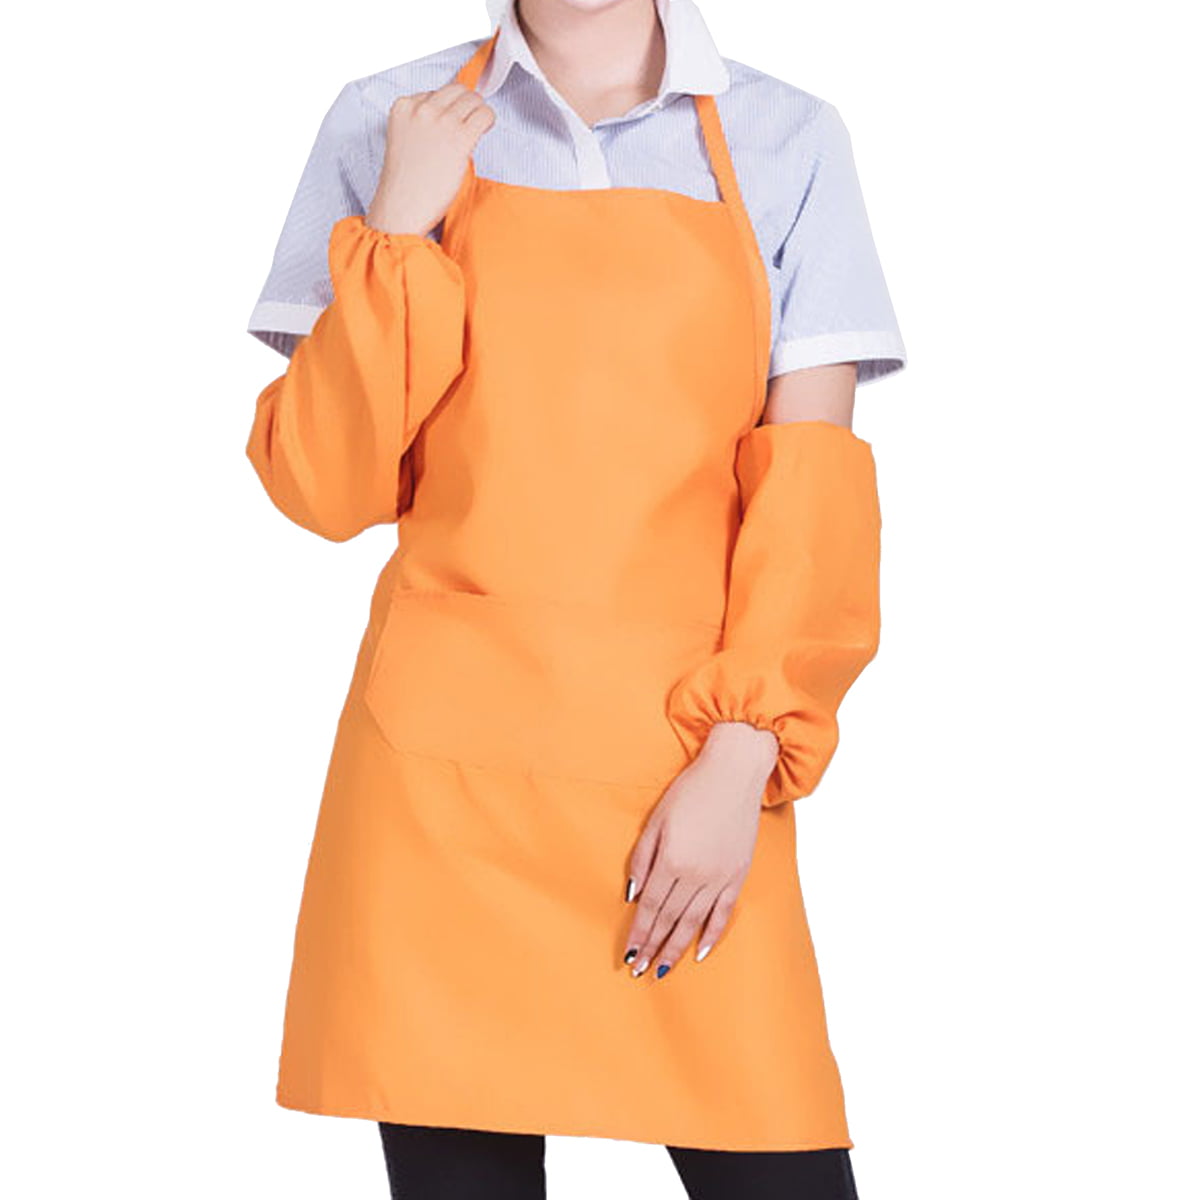 Tabard Tabbard Apron Pockets Work Wear Overall Catering Laundry Cleaning Unisex 